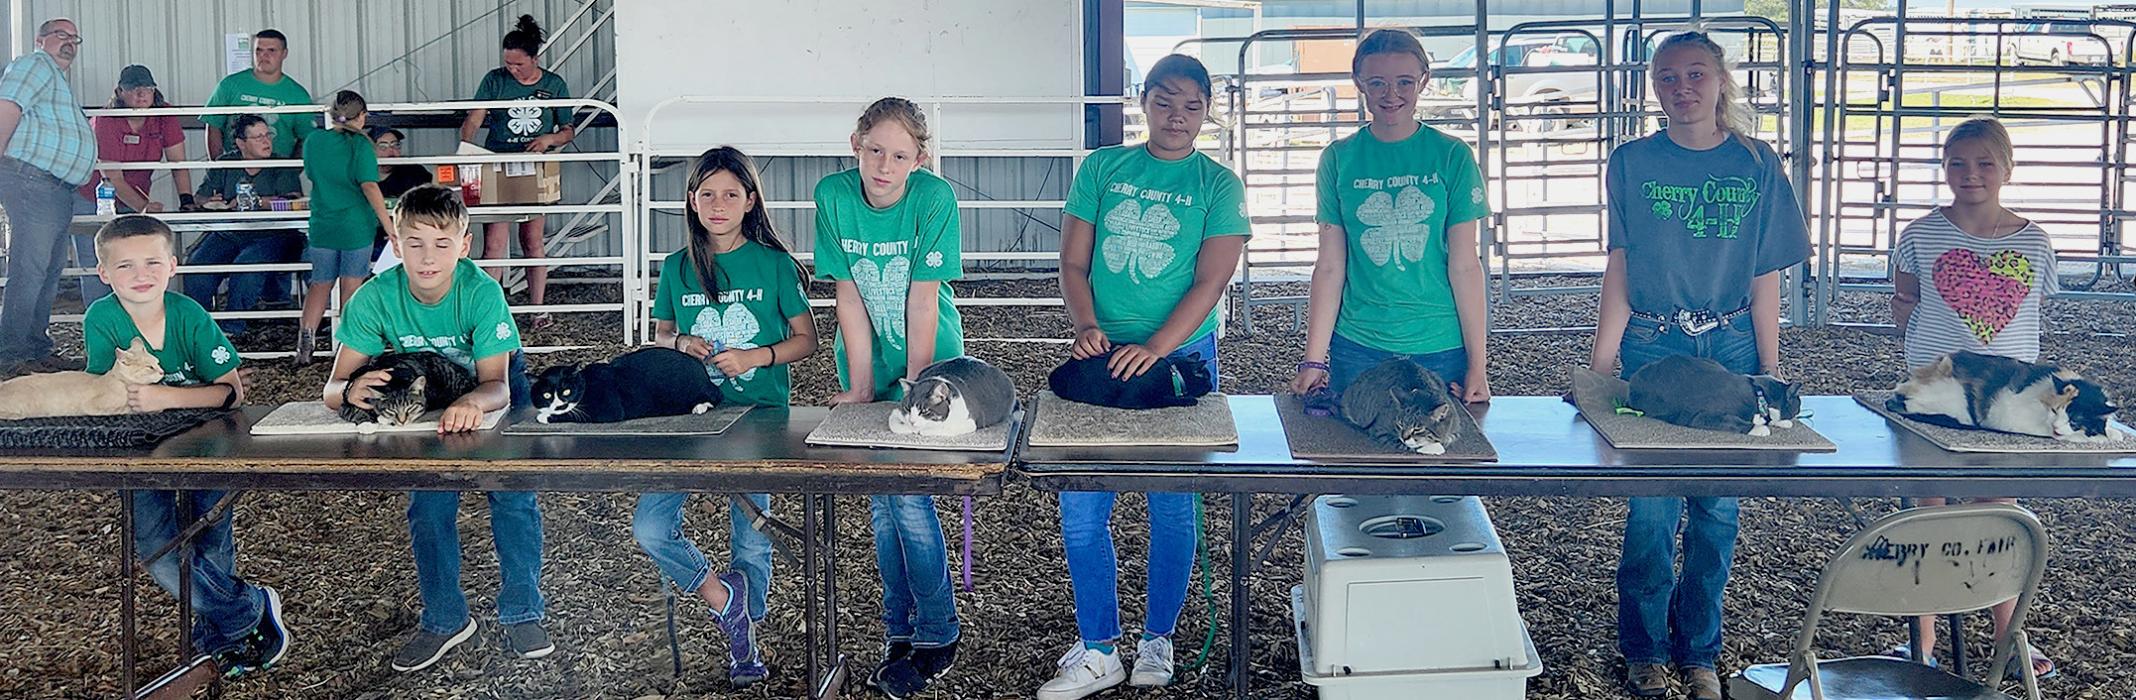 Showing in the 4-H Cat Show were: Case Larson, Tilden Foster, Charlotte Coleman, Sophia Estrada (2), Madysyn Bopp, Keeleigh Burge (2), along with their helpers.